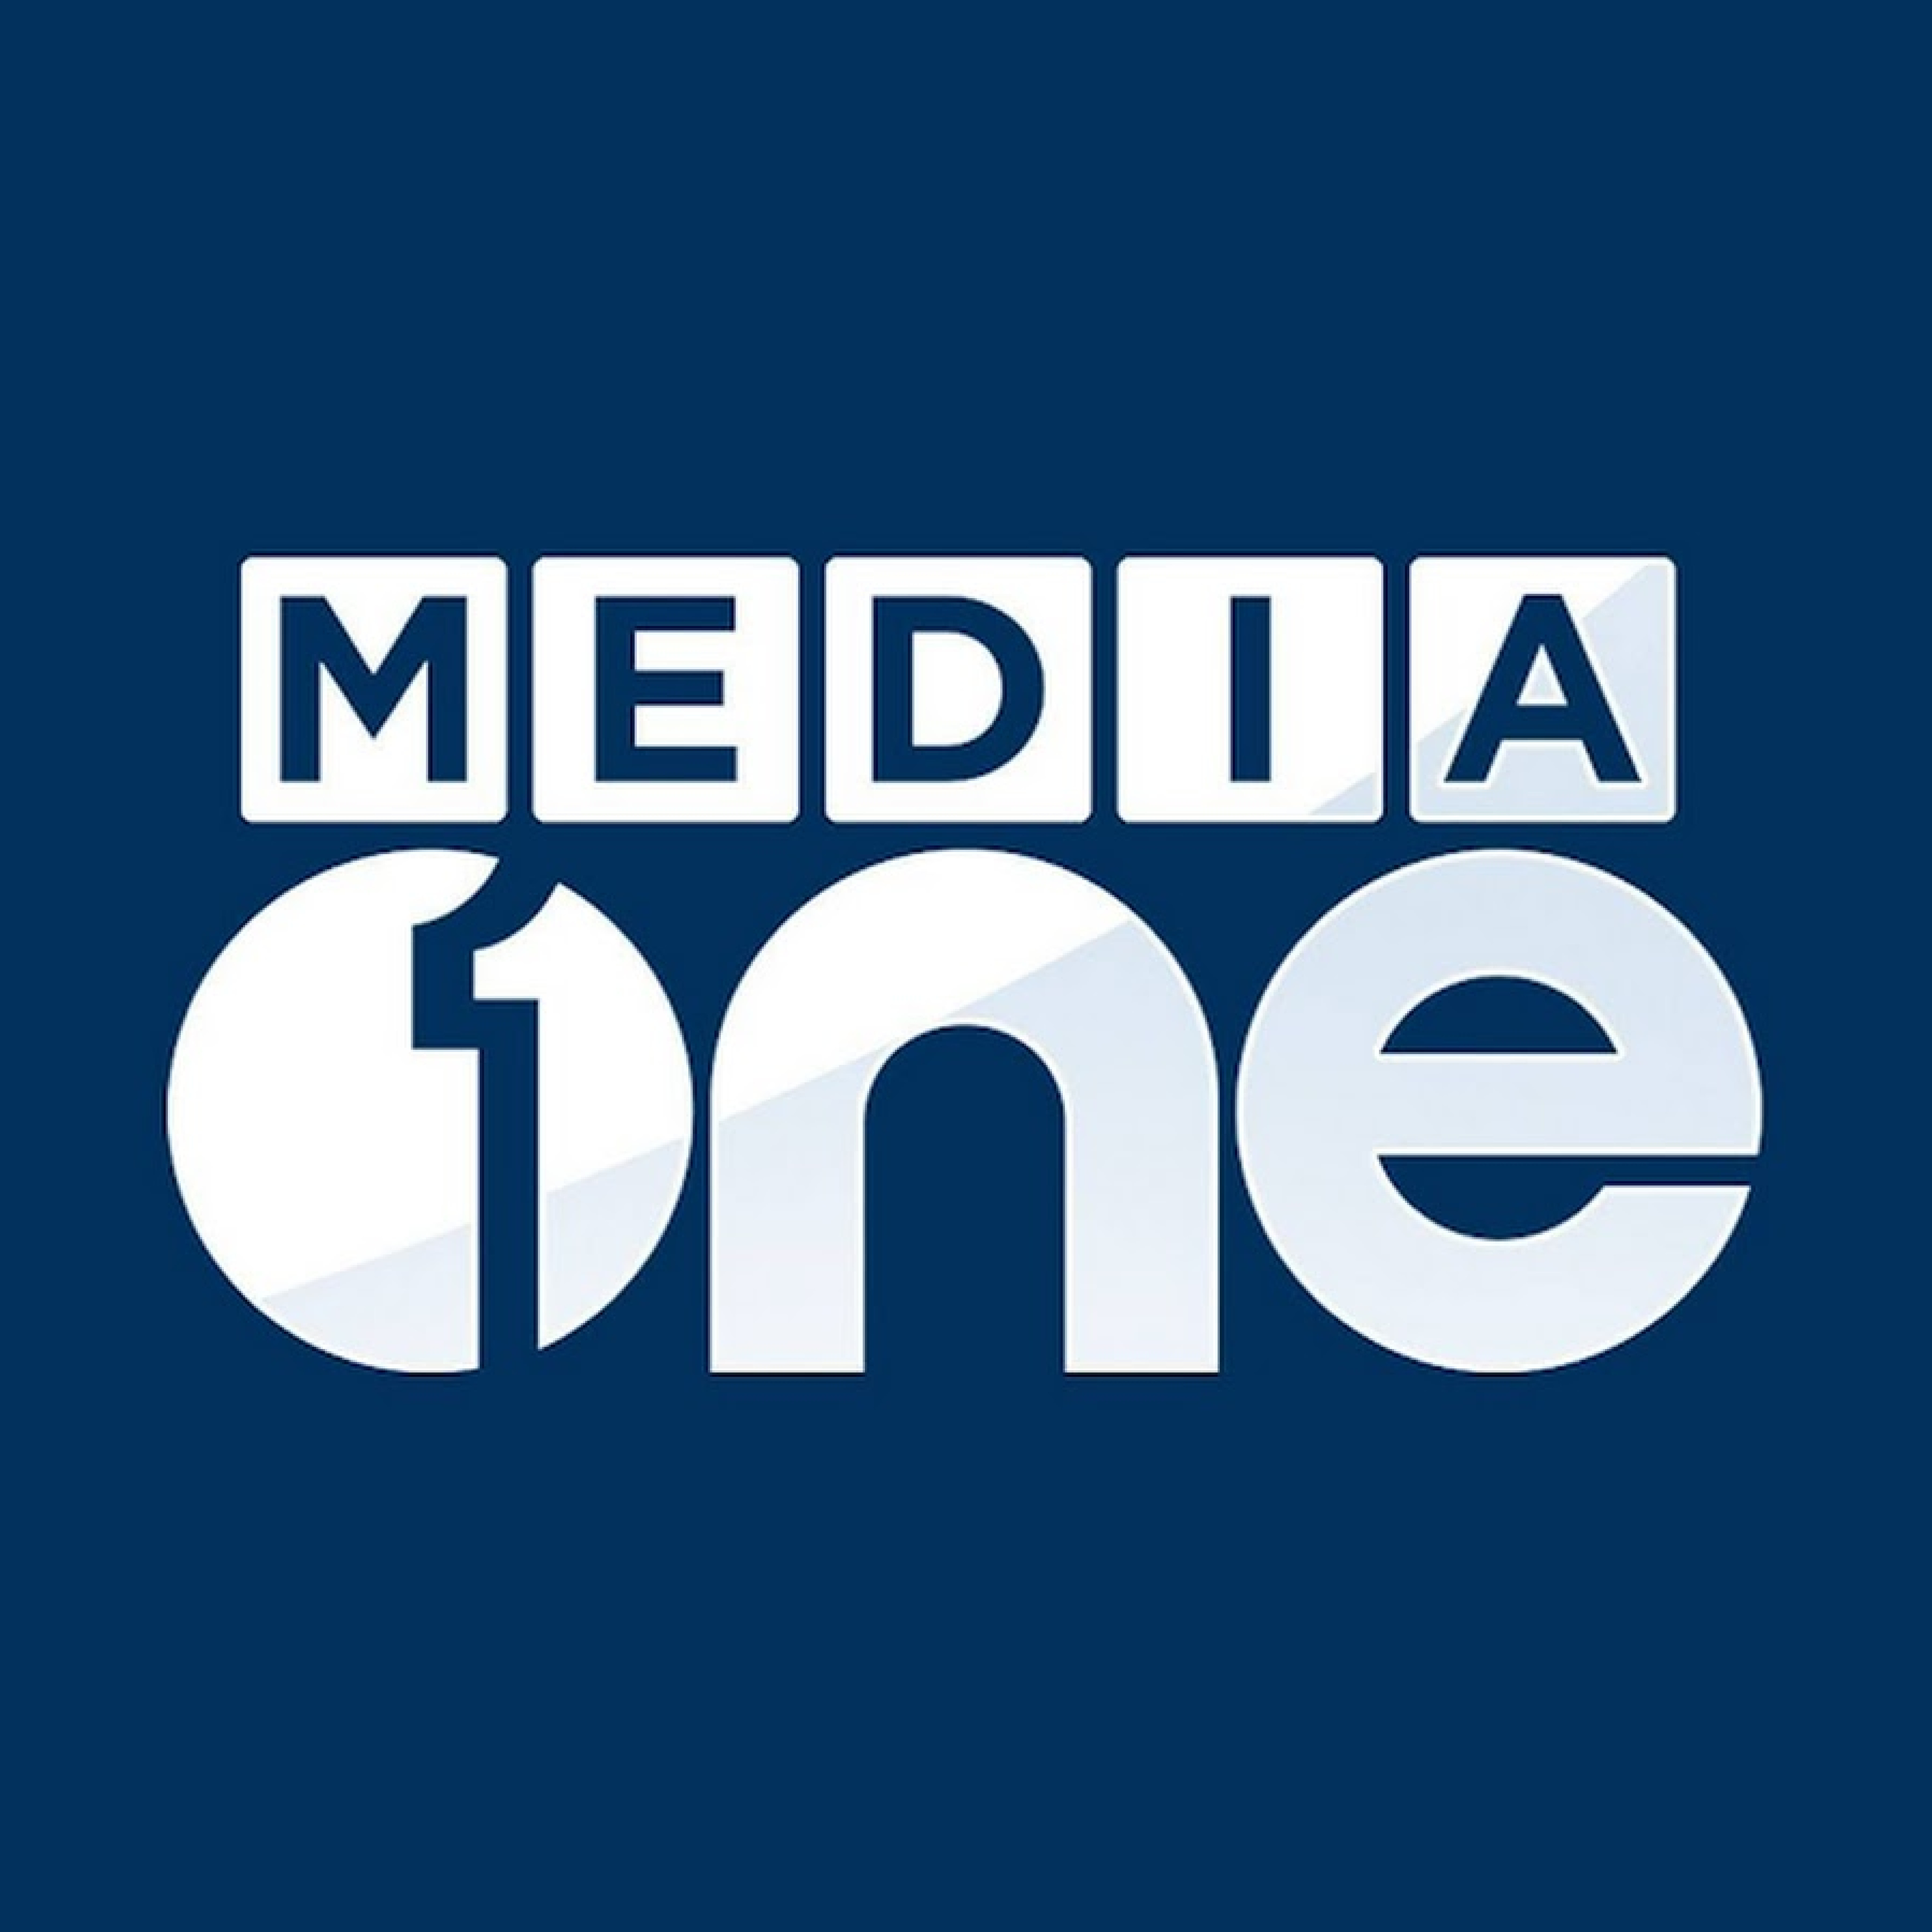 Centre must not be allowed to abuse powers to curb critical voices: Media One News